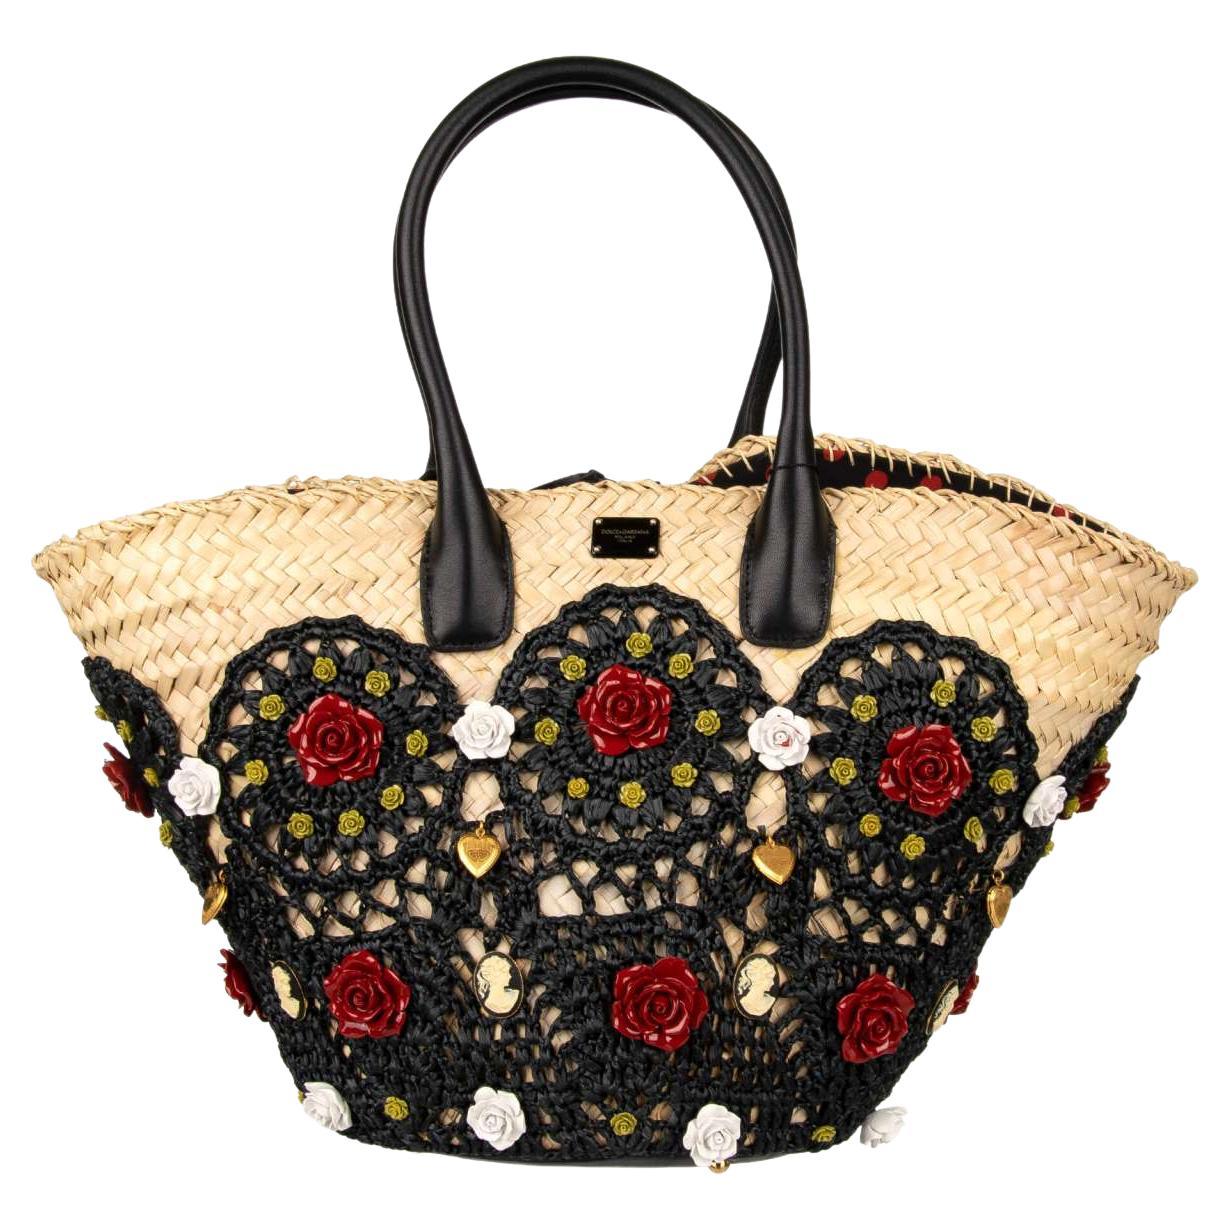 D&G Large Jeweled Straw Basket Beach Bag KENDRA with Roses Black Beige For Sale